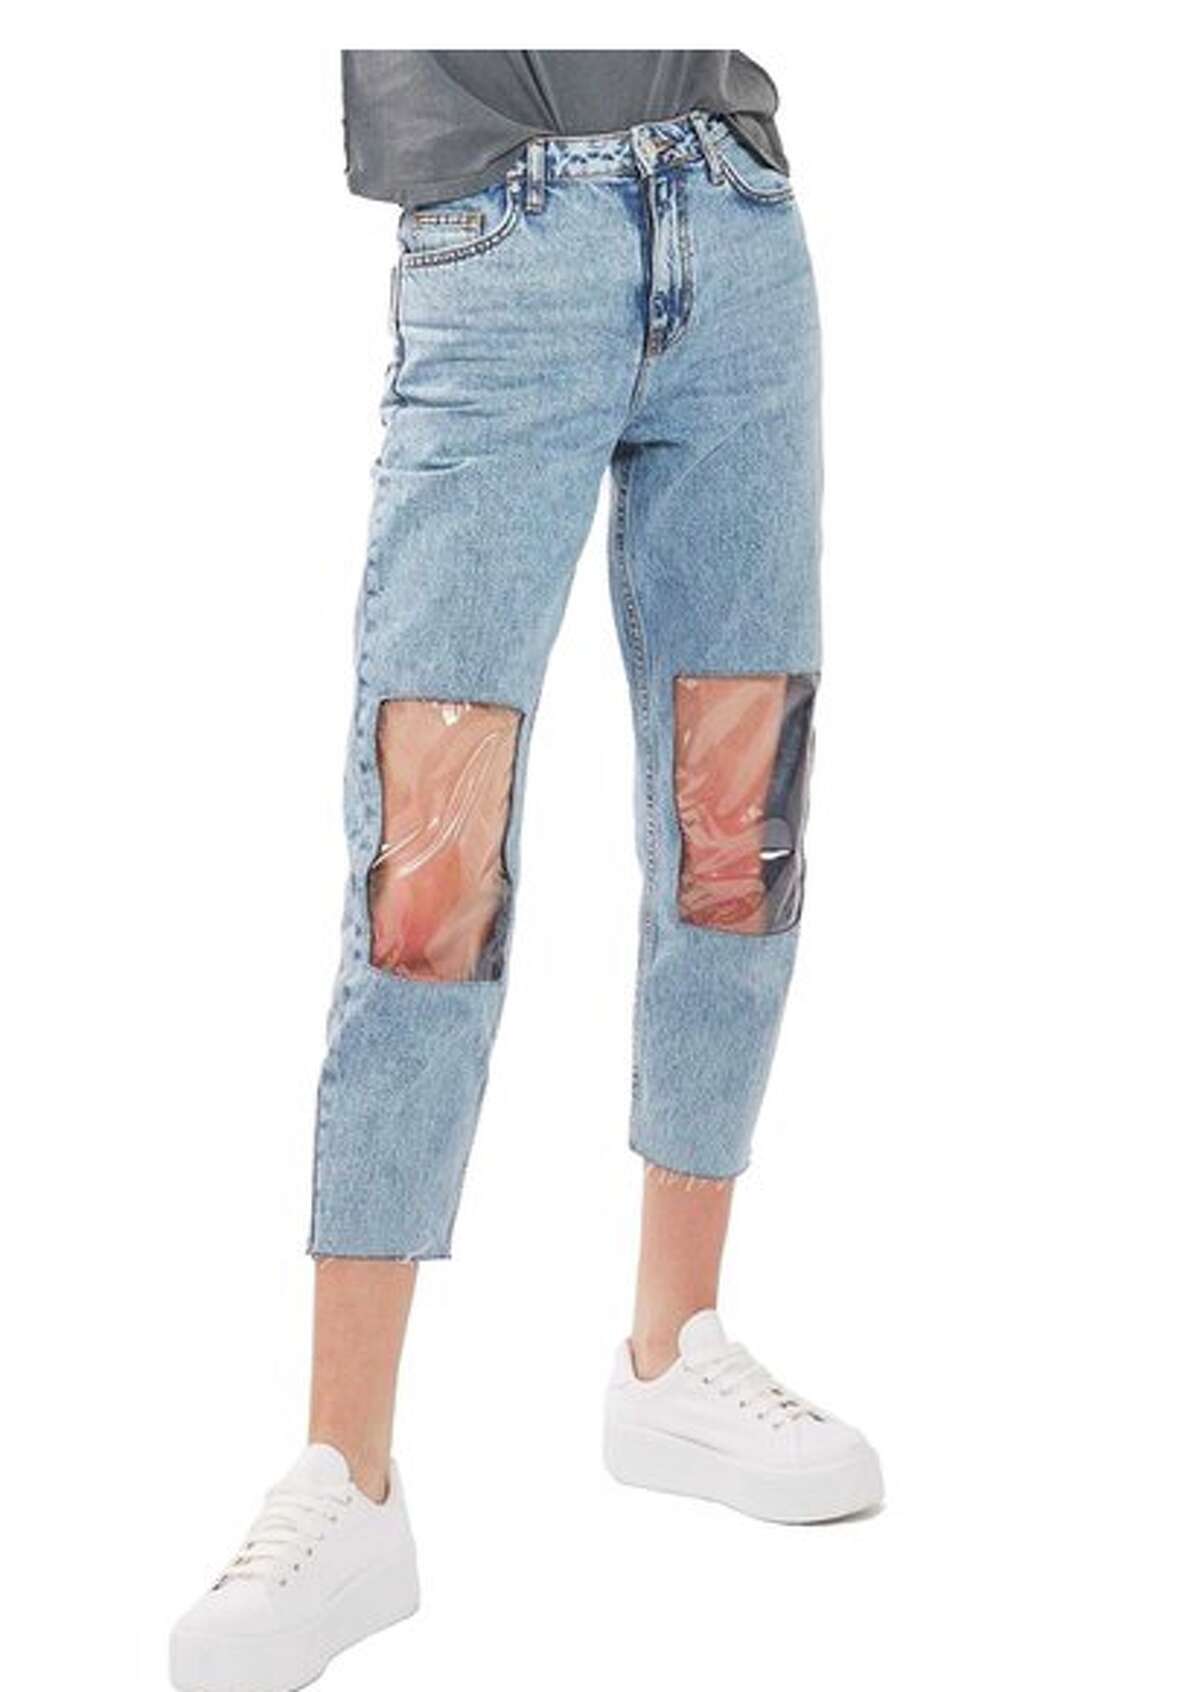 extreme cut out jean